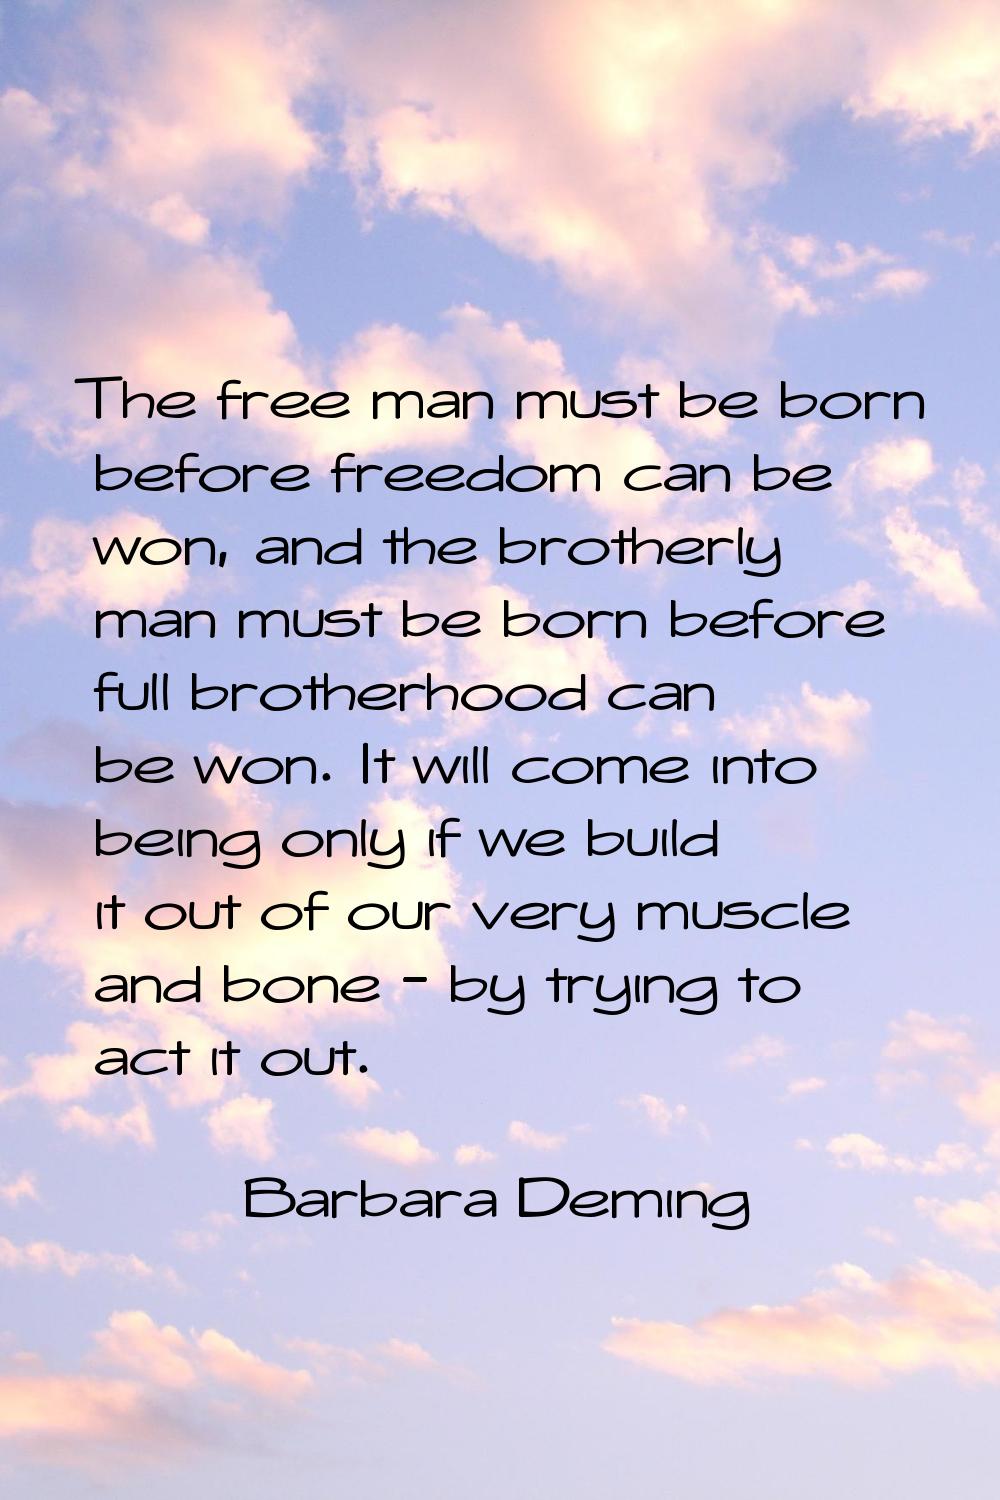 The free man must be born before freedom can be won, and the brotherly man must be born before full